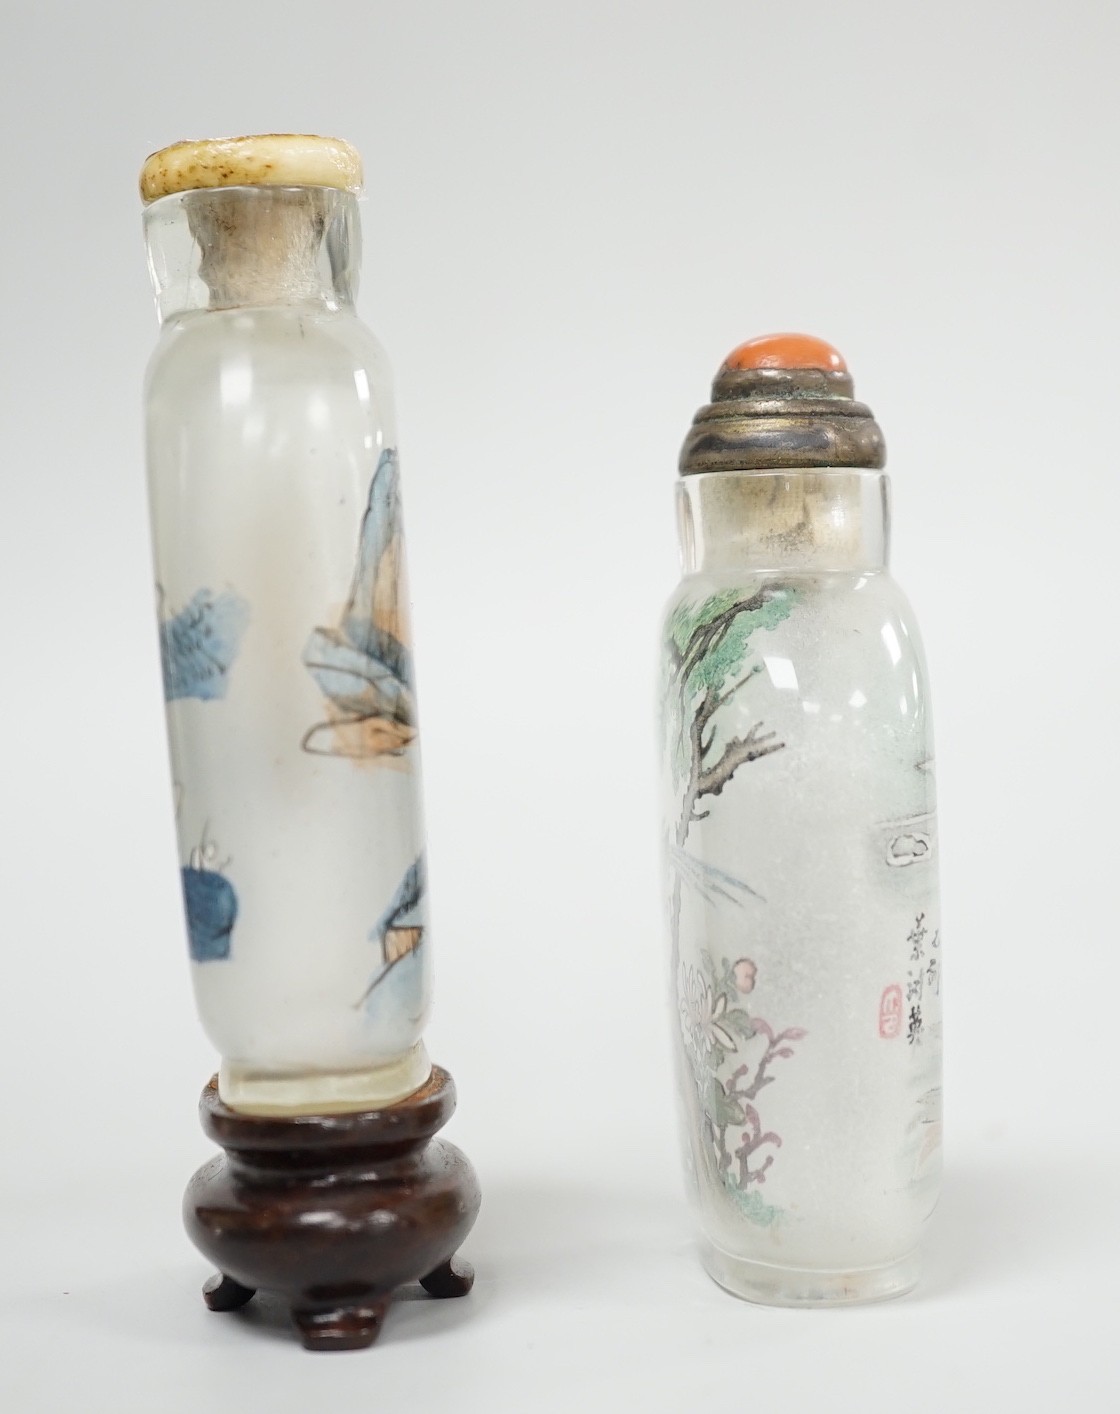 Two Chinese inside painted glass snuff bottles, 20th century, tallest 6.3 cm